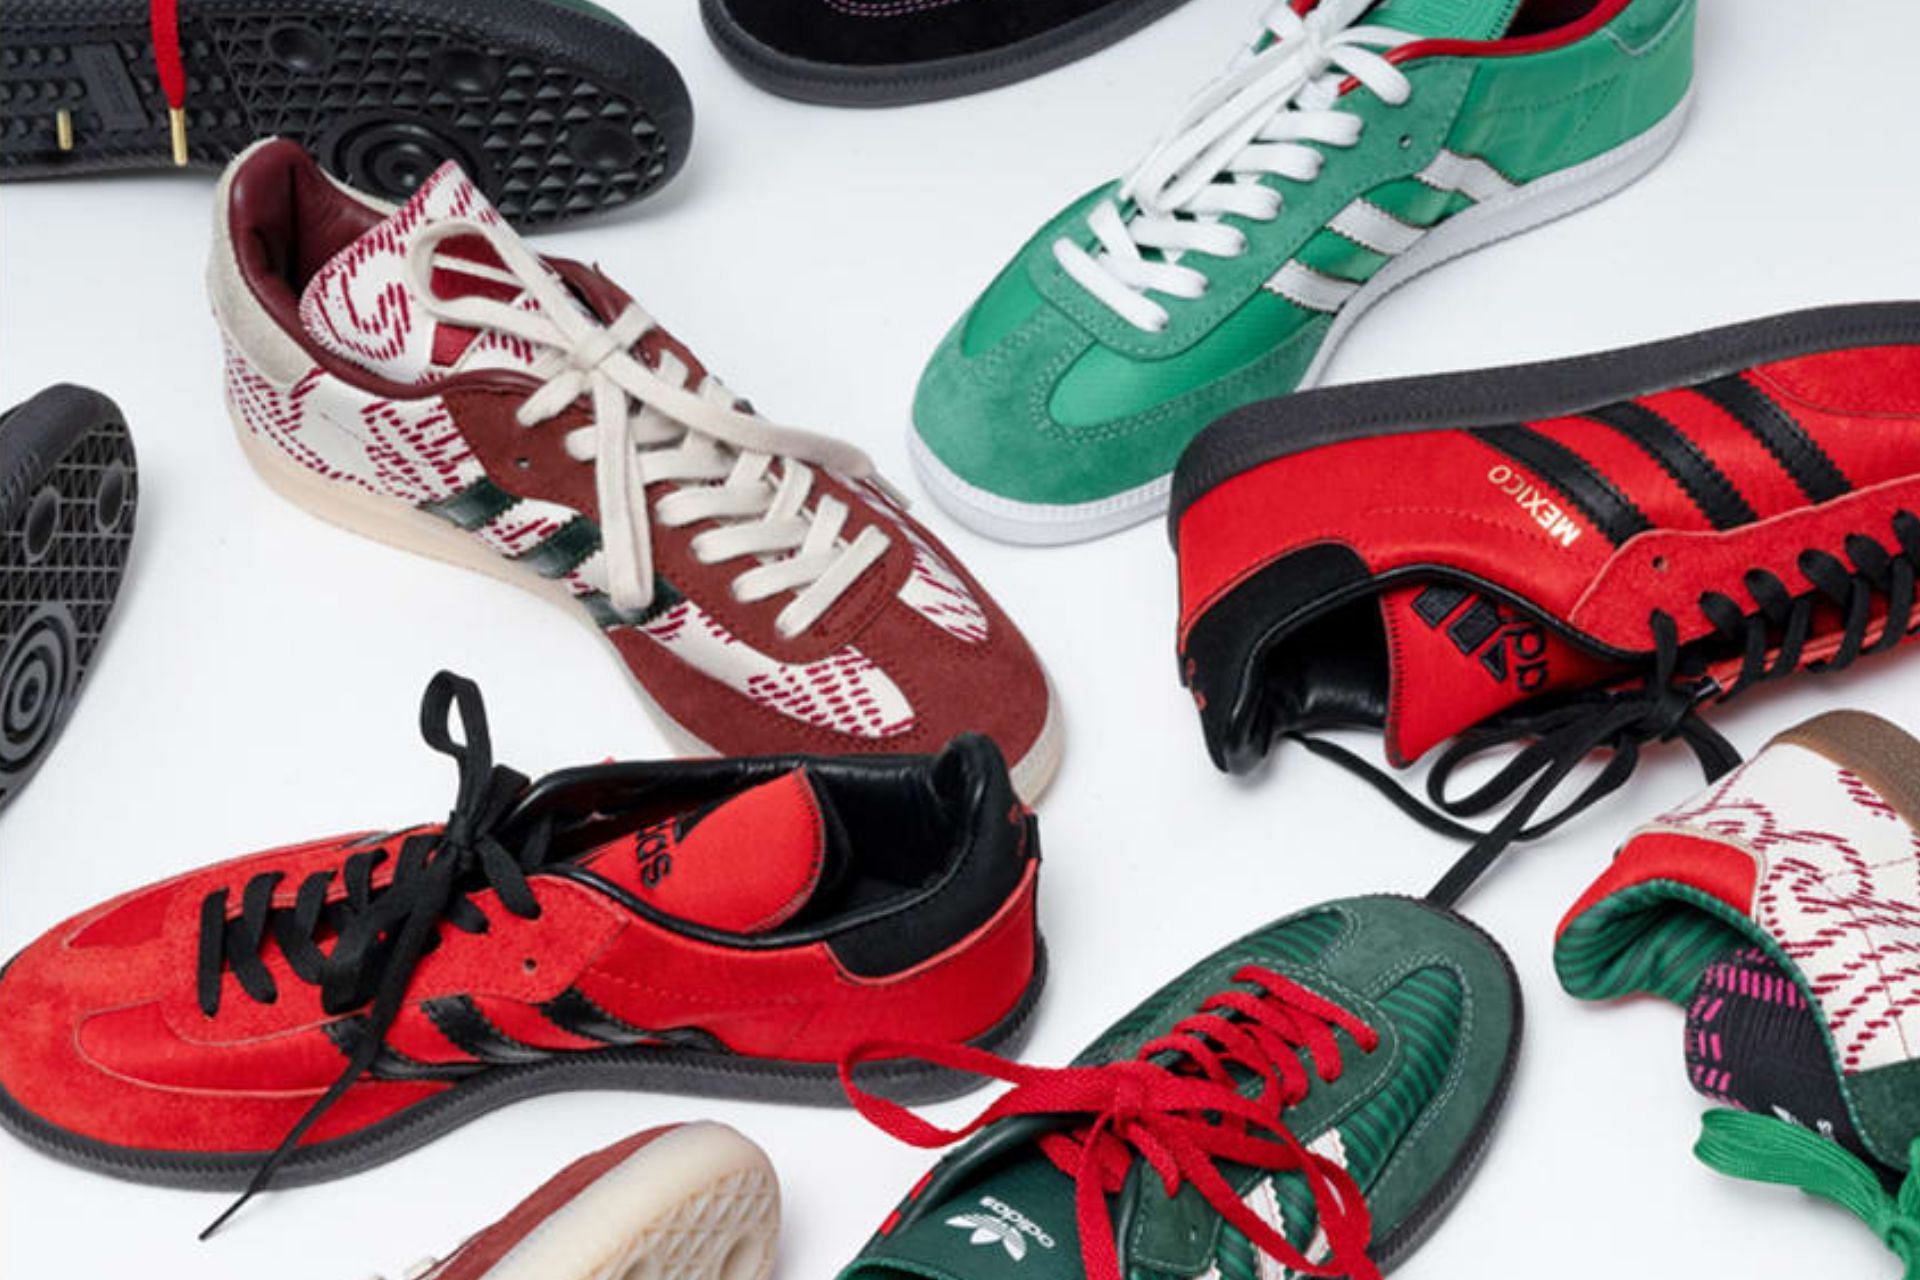 Explained: How to easily buy sneakers online on release day (Image via Adidas)